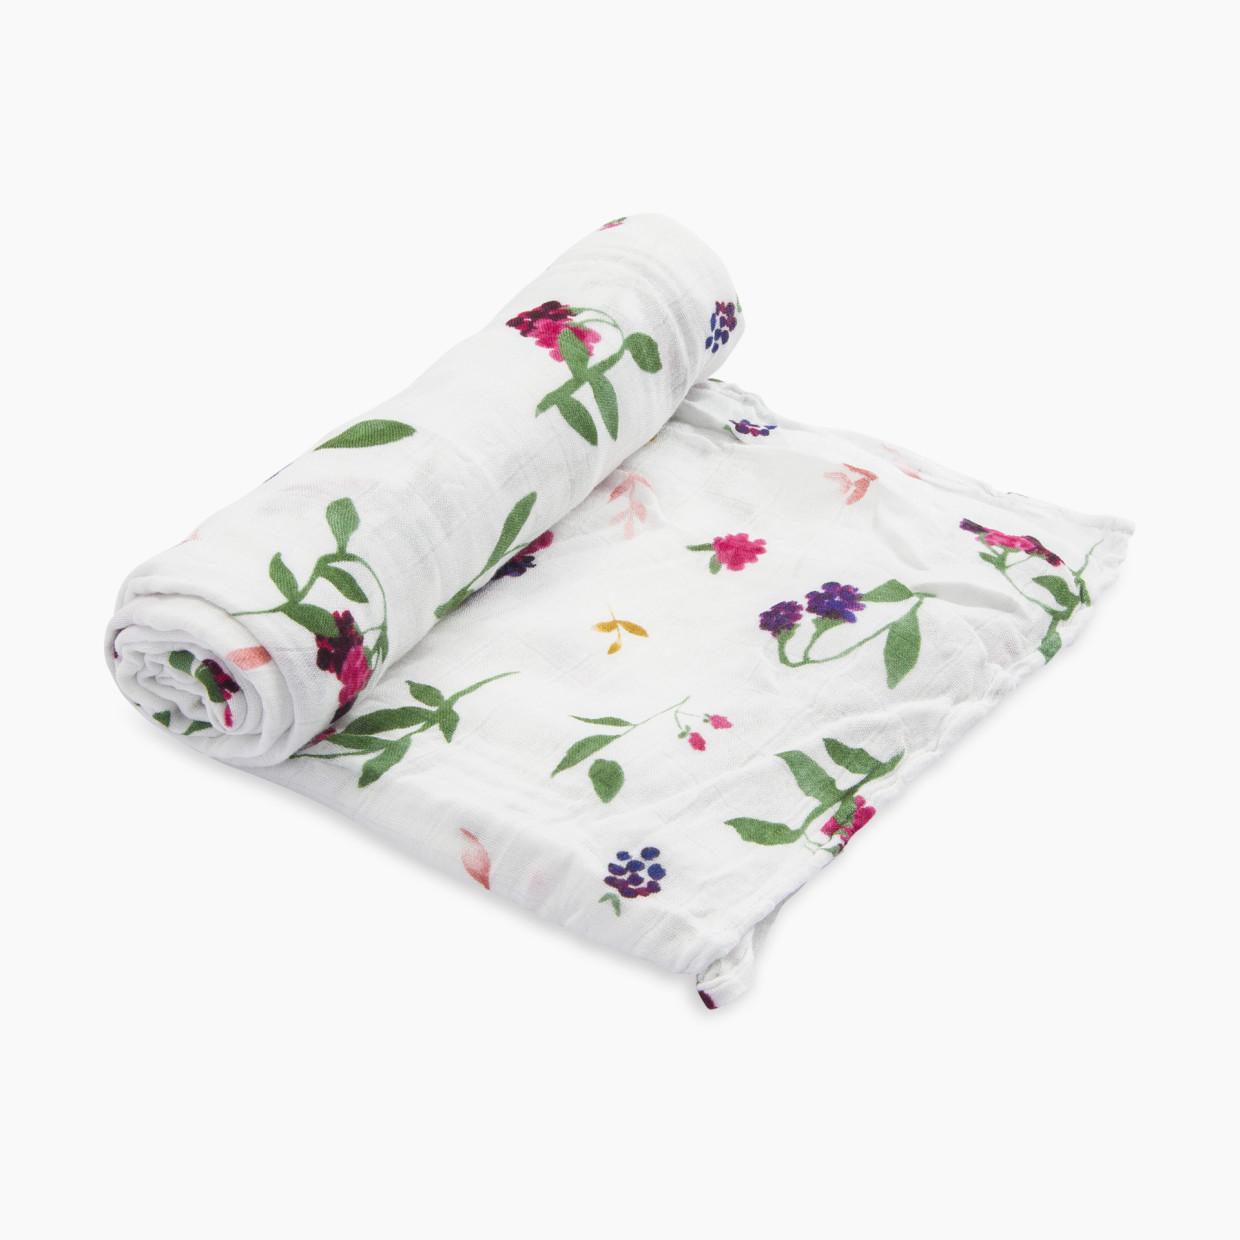 Little Unicorn Deluxe Bamboo Swaddle Blanket - Berry Patch.